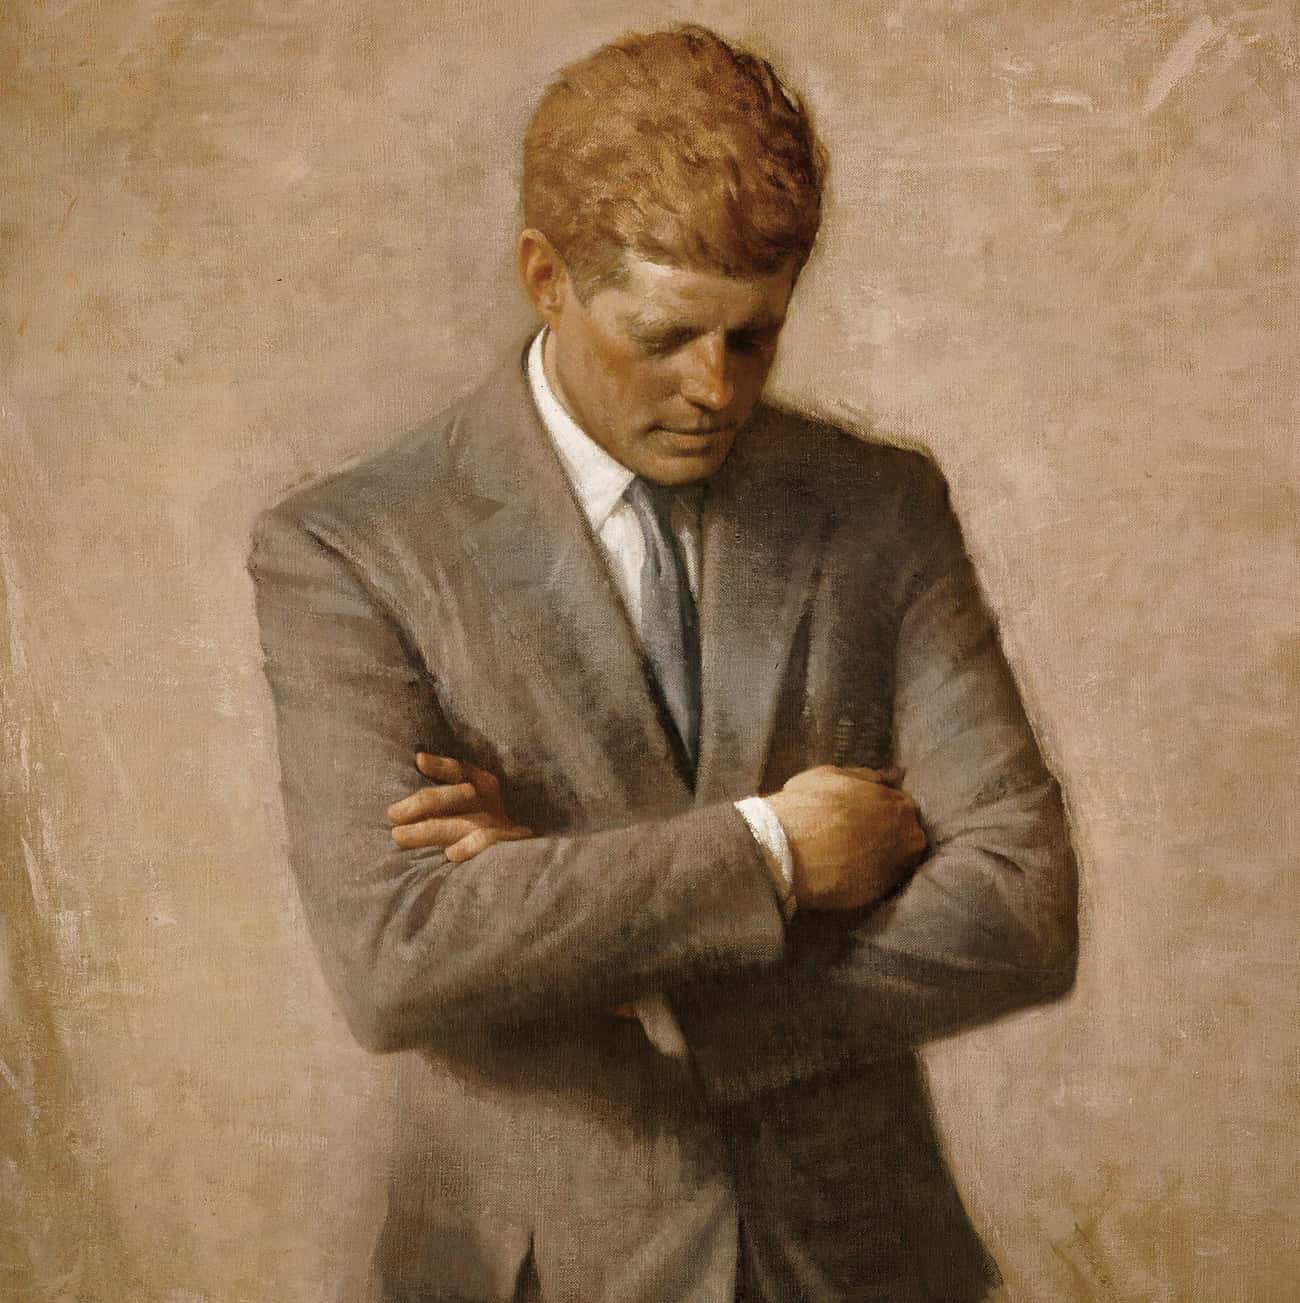 JFK Was Riddled With Disease